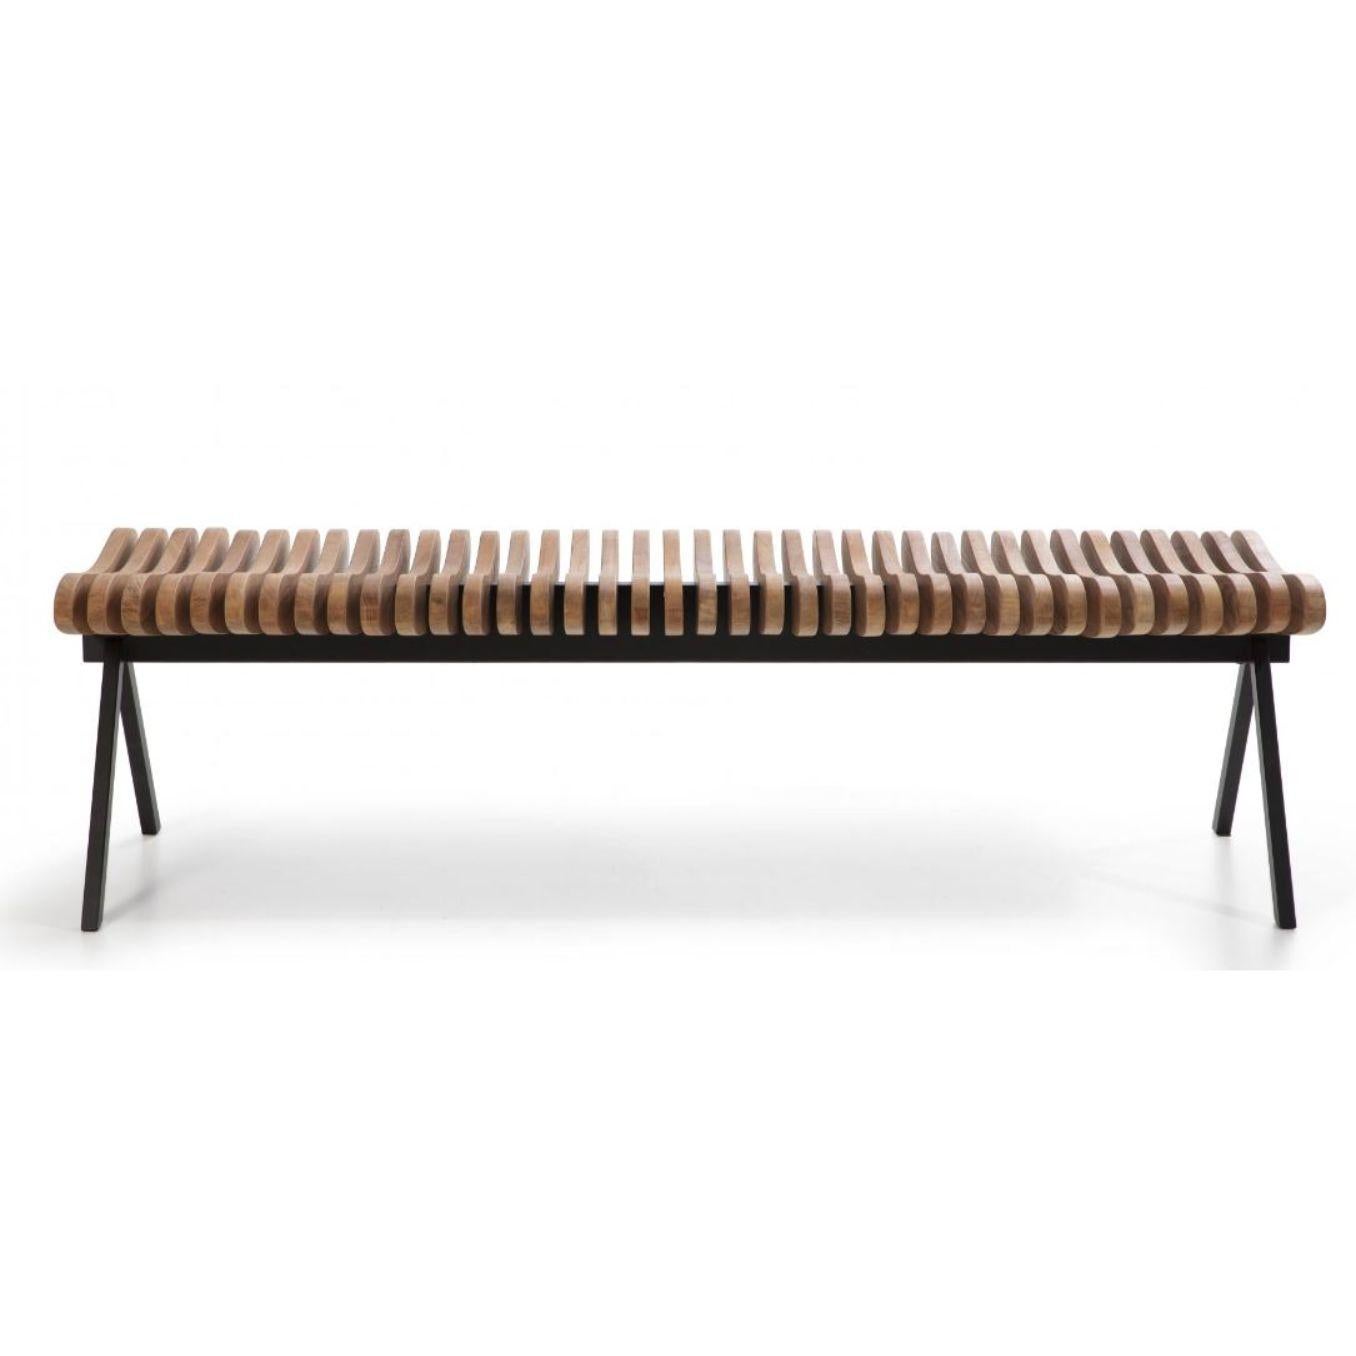 Large Perlude teak bench by Caroline Voet
Dimensions: 50 x 190 x H 43 cm
Materials: Teak
Also available in oak natural, seating oak black, seating walnut natural.

The PRELUDE benches are assembled from top grade FSC-labelled wood, solid oak